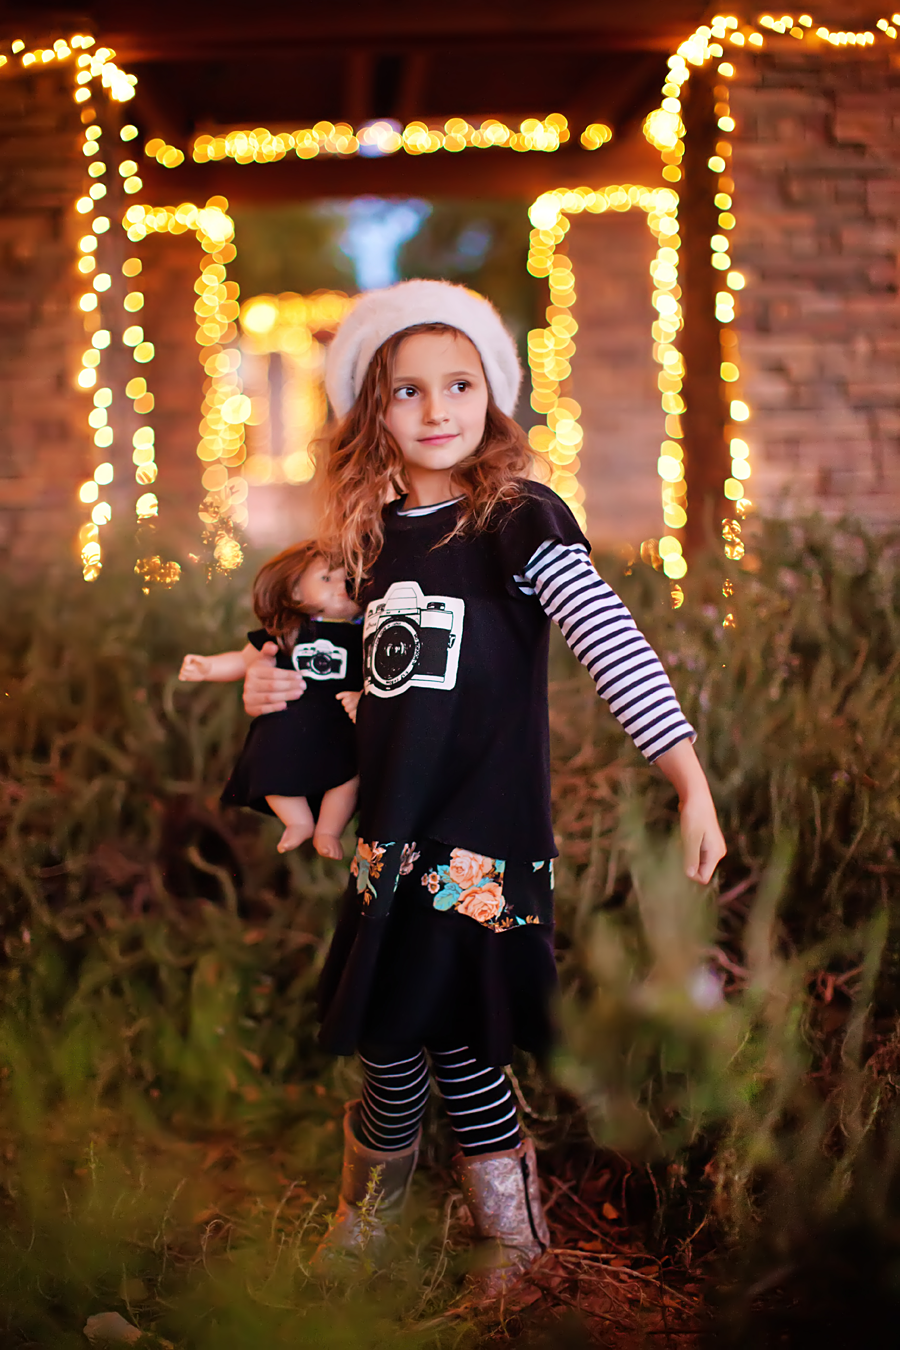 Wear over a long sleeve tee during colder months! Photography by Laura Winslow Photography via lilblueboo.com